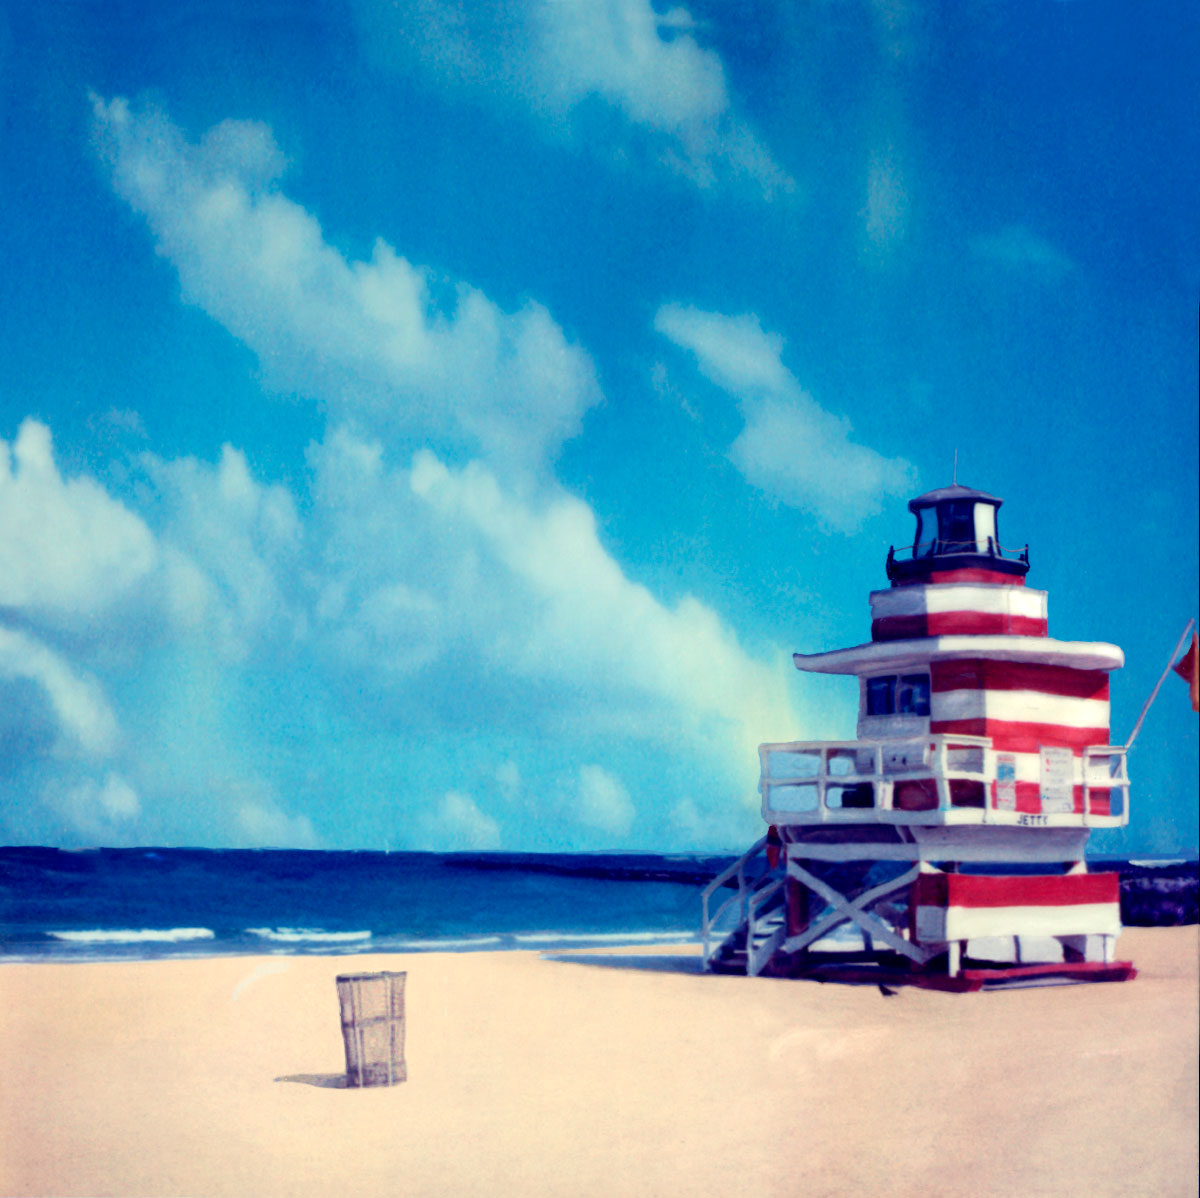 "Light House Lifeguard Stand"  <br>with Trash Can on Beach, Miami Beach,FL